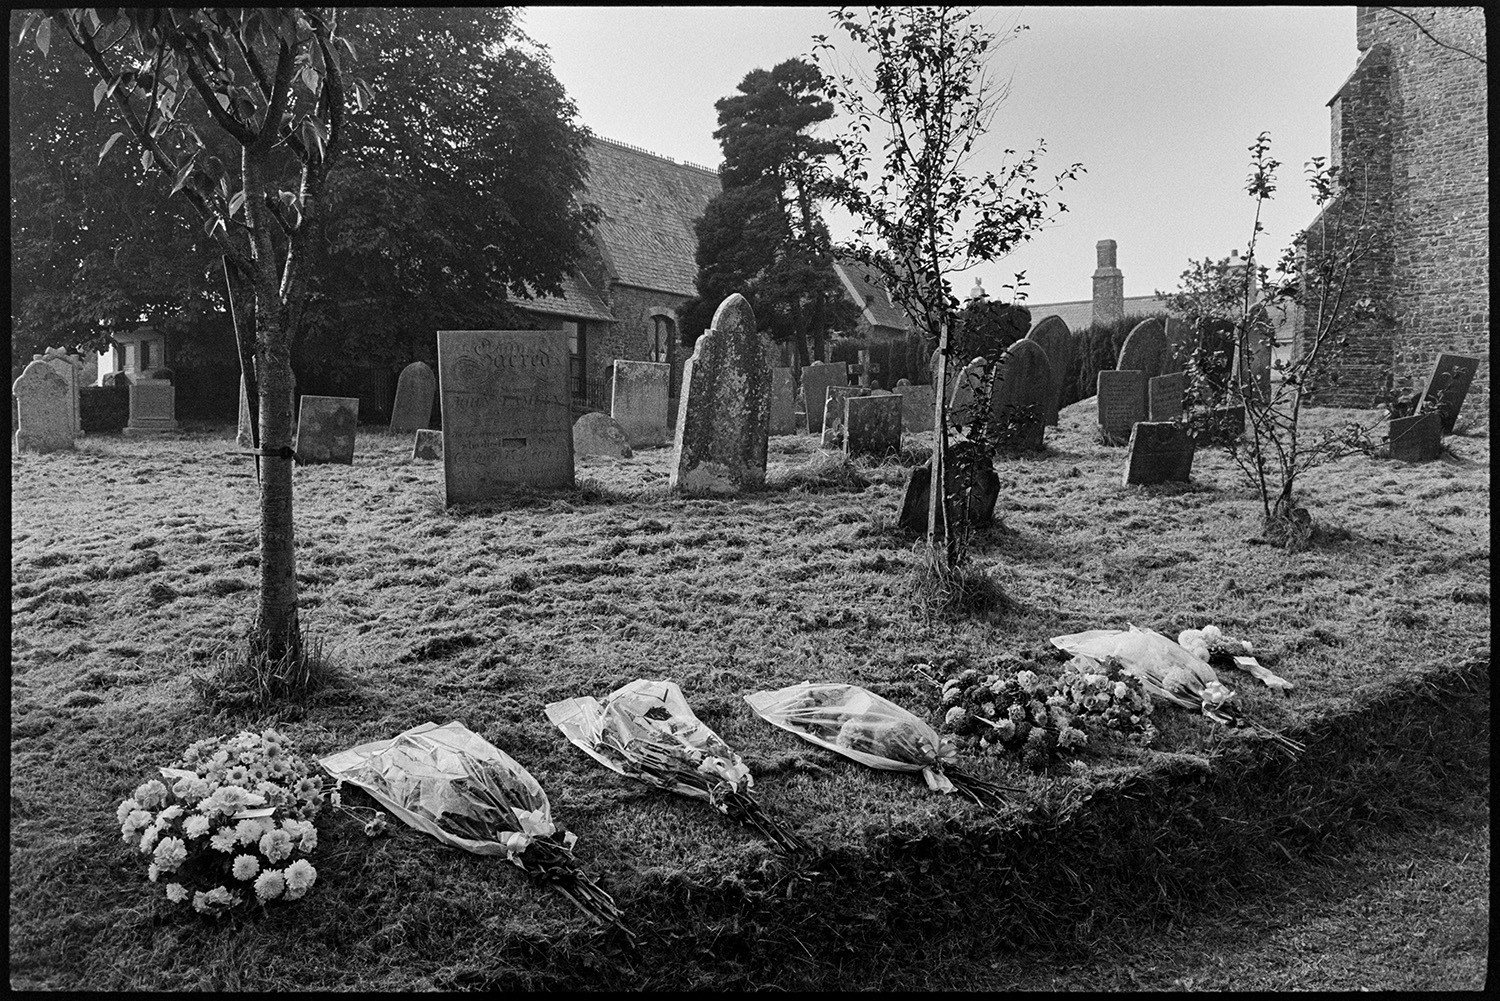 Bunches of funeral flowers in graveyard after funeral.
[Arrangements and bouquets of flowers laid out along the grass bank by gravestones in Atherington churchyard, after a funeral.]